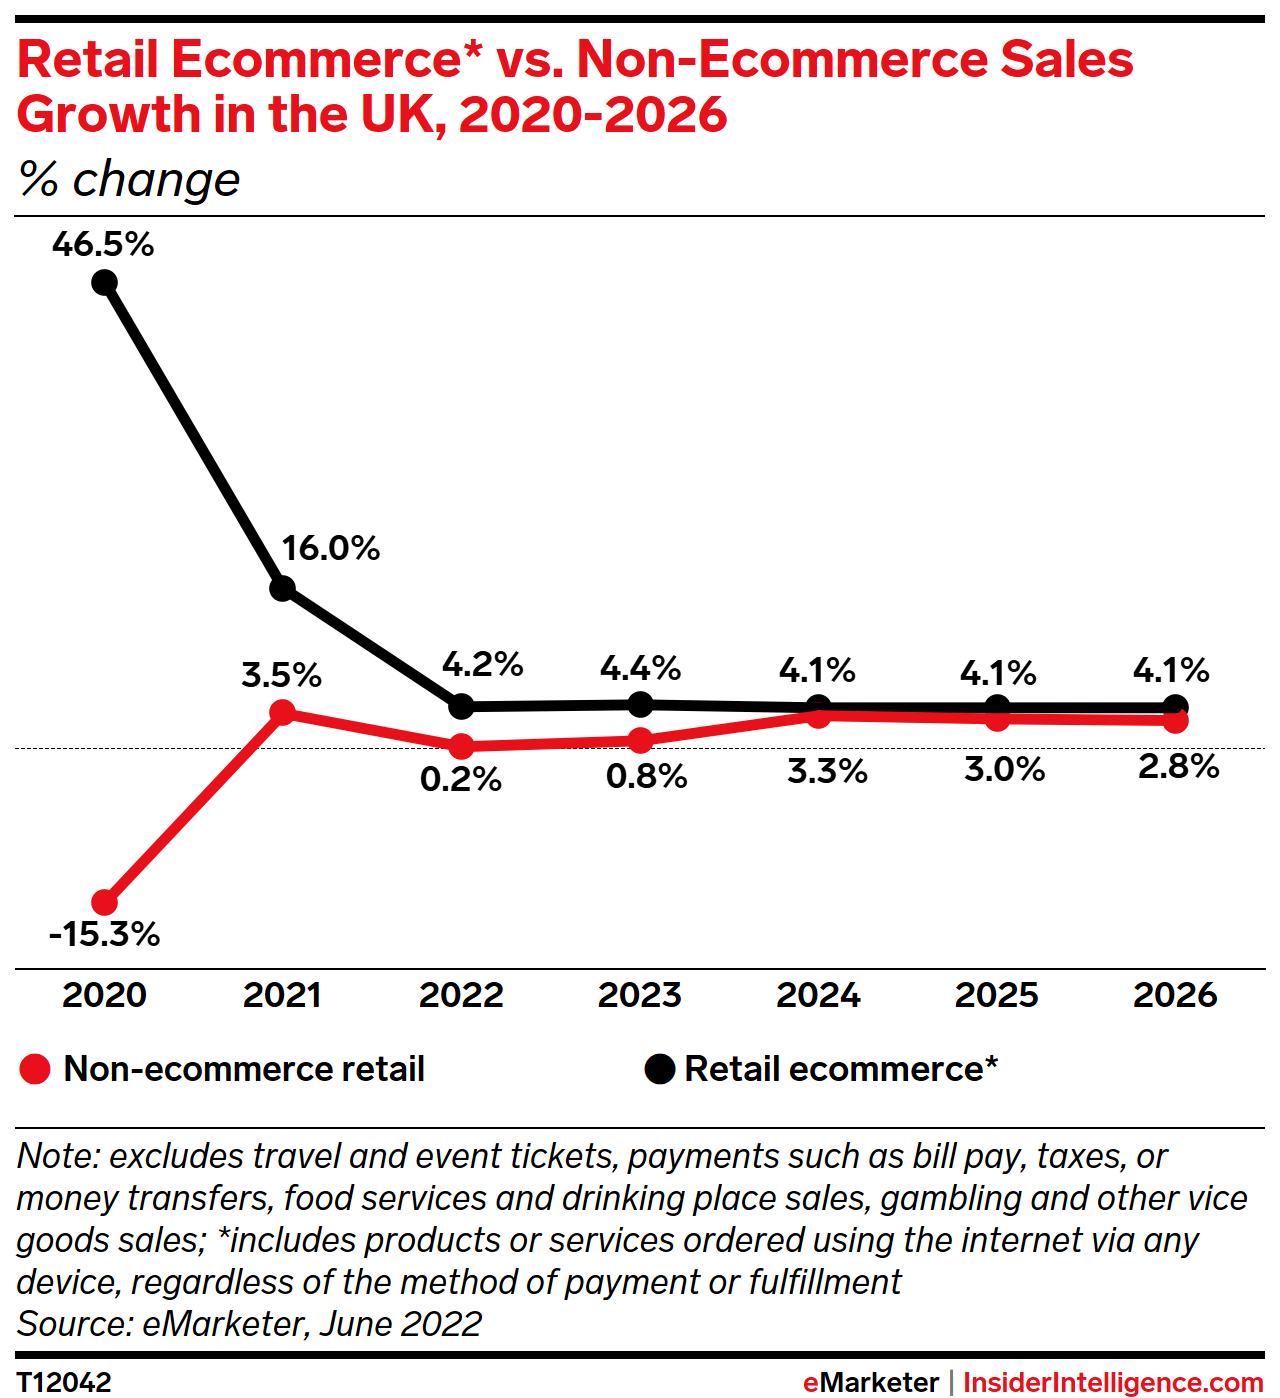 Retail Ecommerce* vs. Non-Ecommerce Sales Growth in the UK, 2020-2026 (% change)